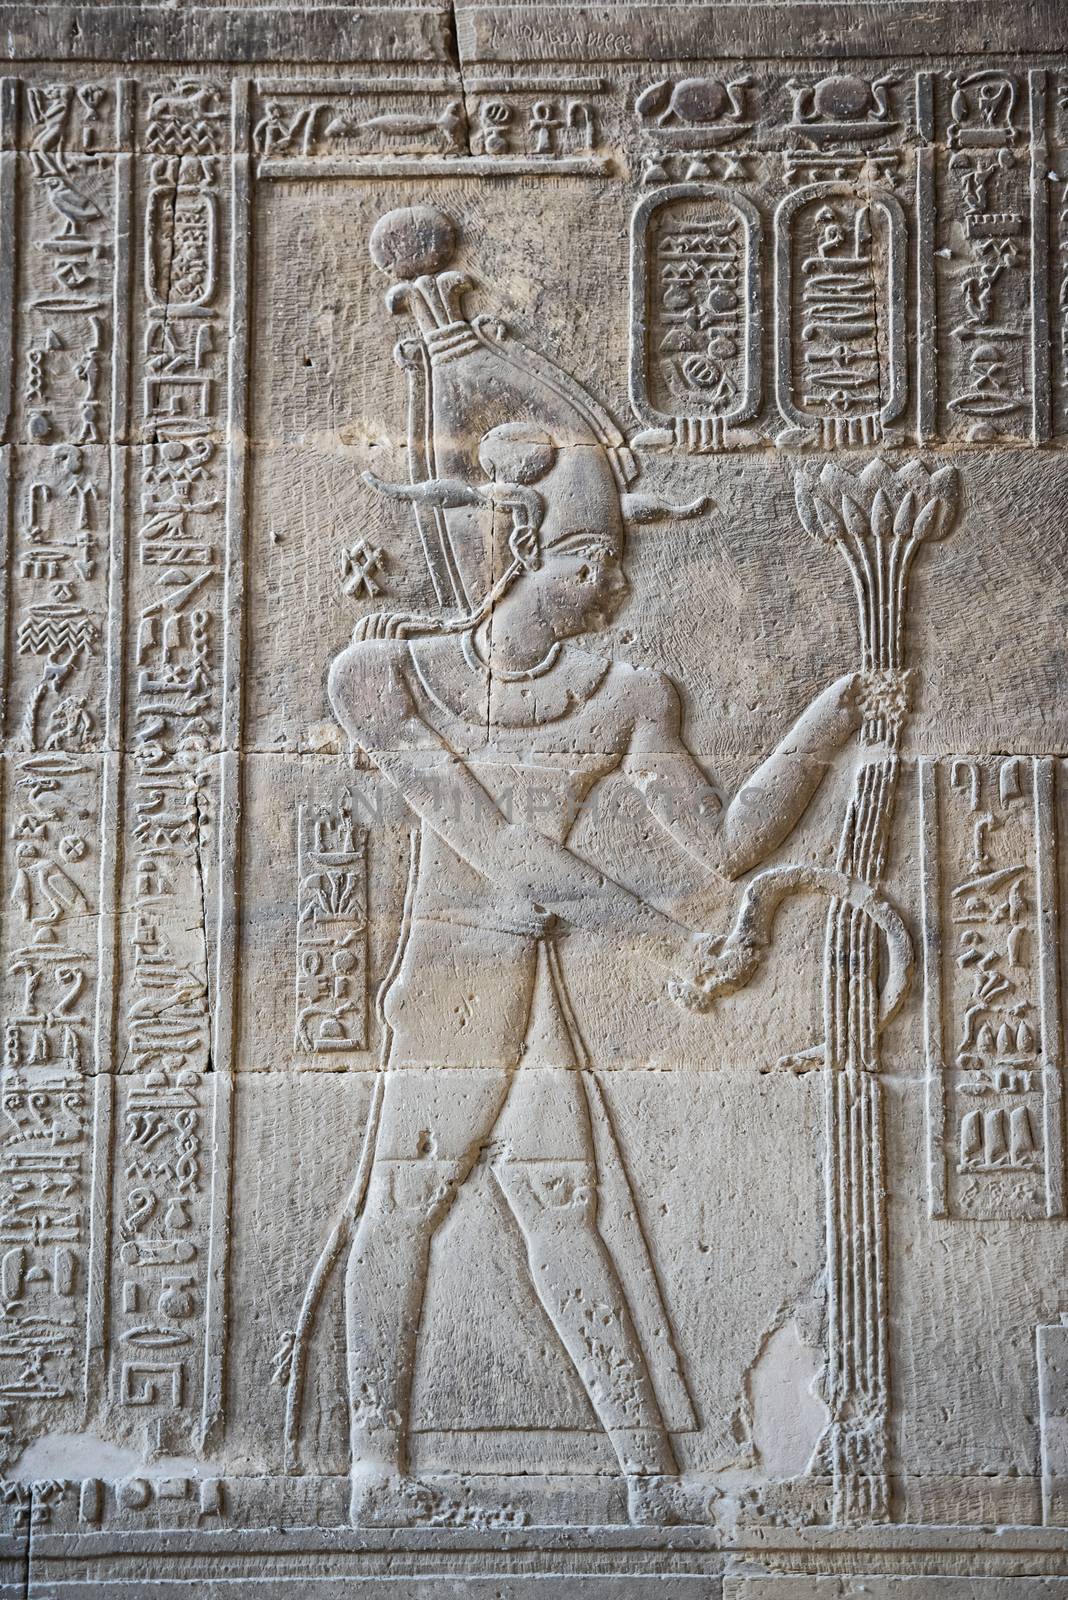 Hieroglypic carvings on wall at the ancient egyptian temple of Khnum in Esna showing god Osiris